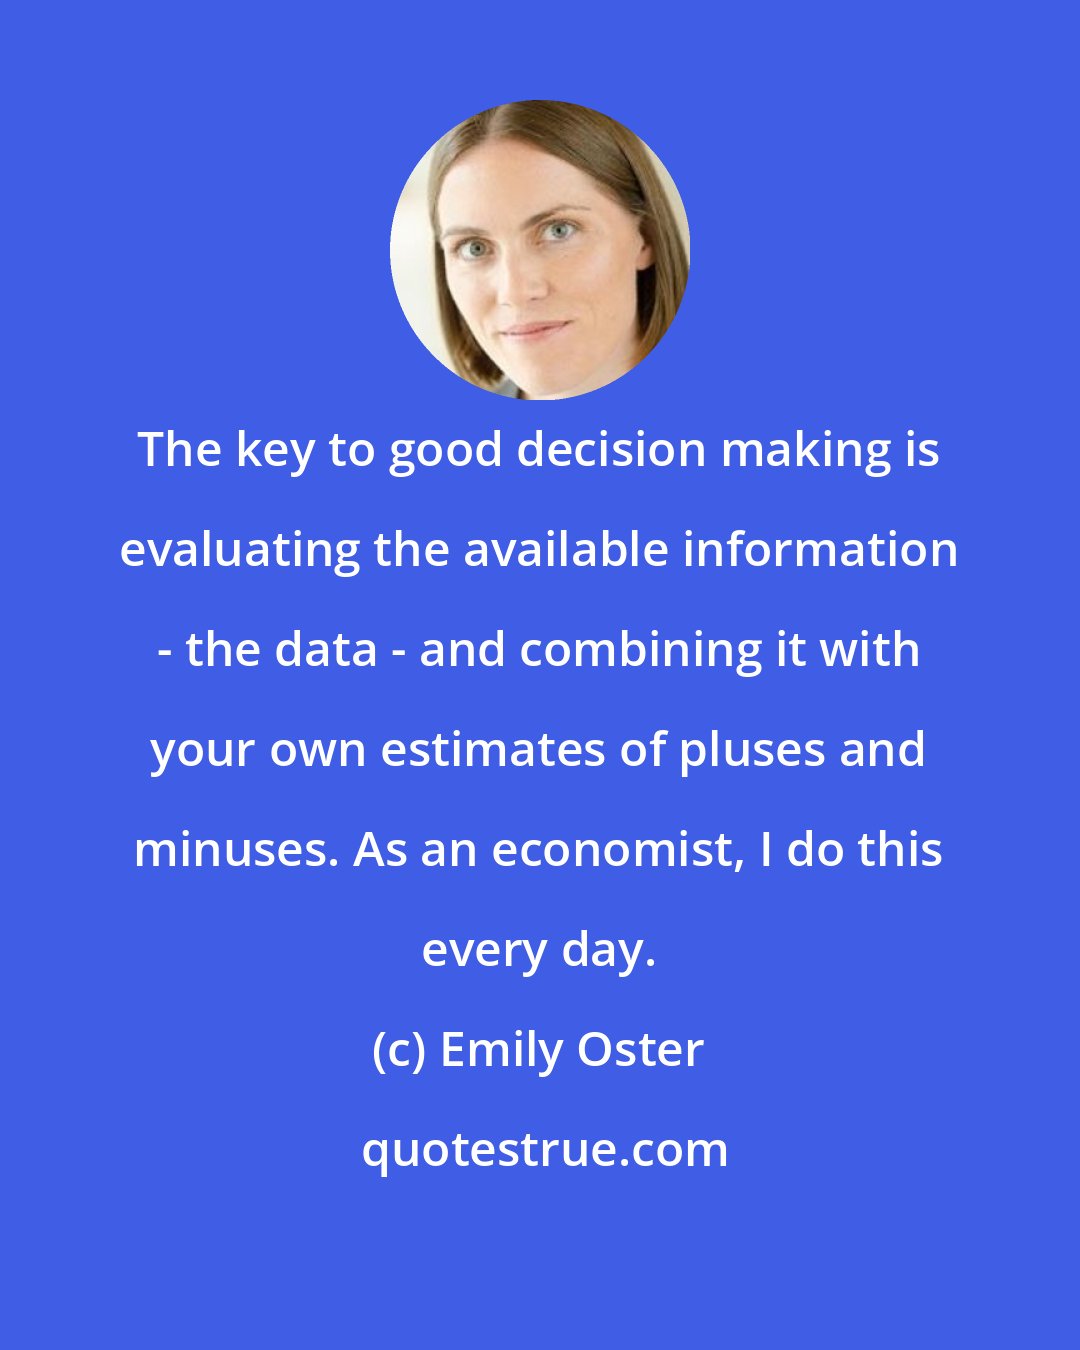 Emily Oster: The key to good decision making is evaluating the available information - the data - and combining it with your own estimates of pluses and minuses. As an economist, I do this every day.